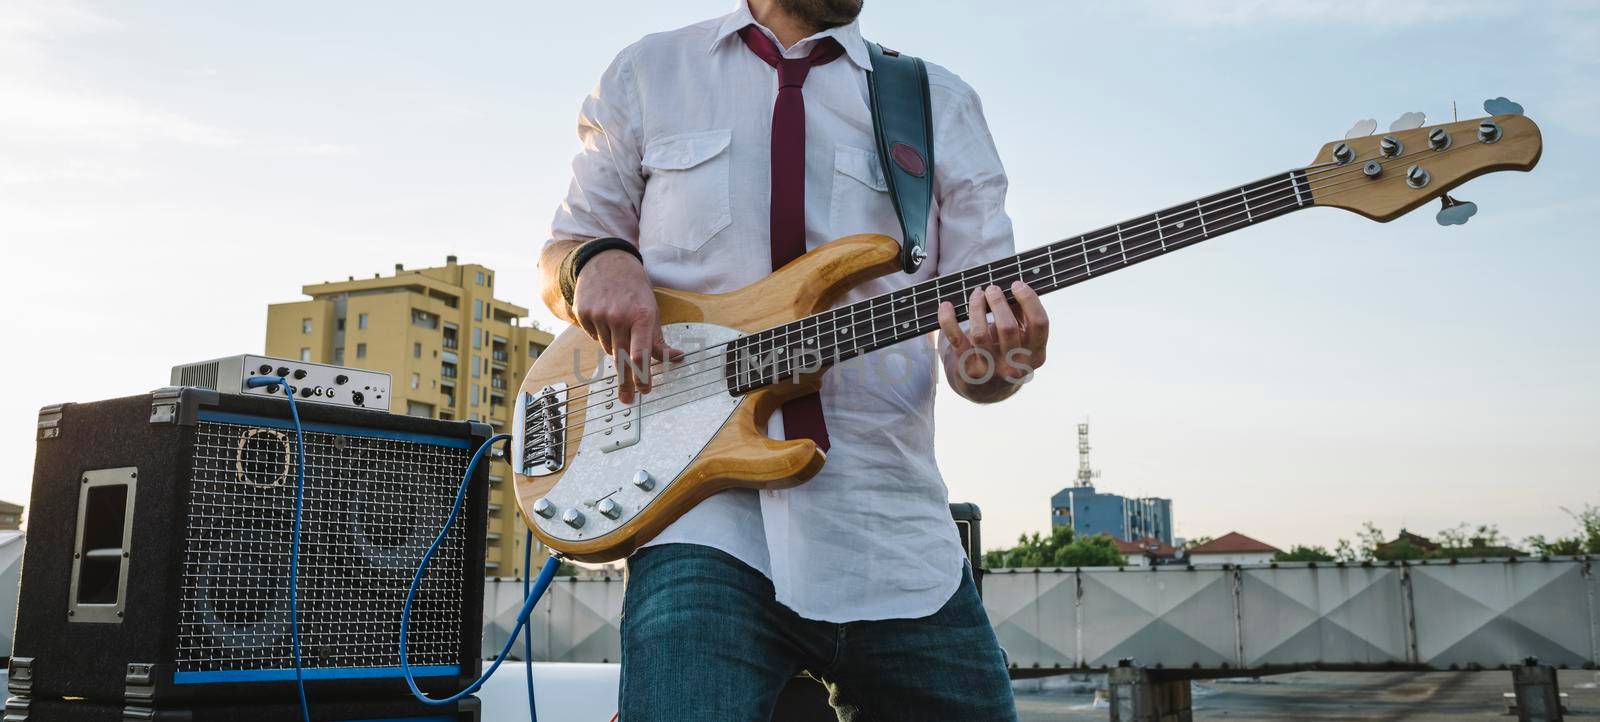 Bass player playing outdoors in a festival by SimmiSimons